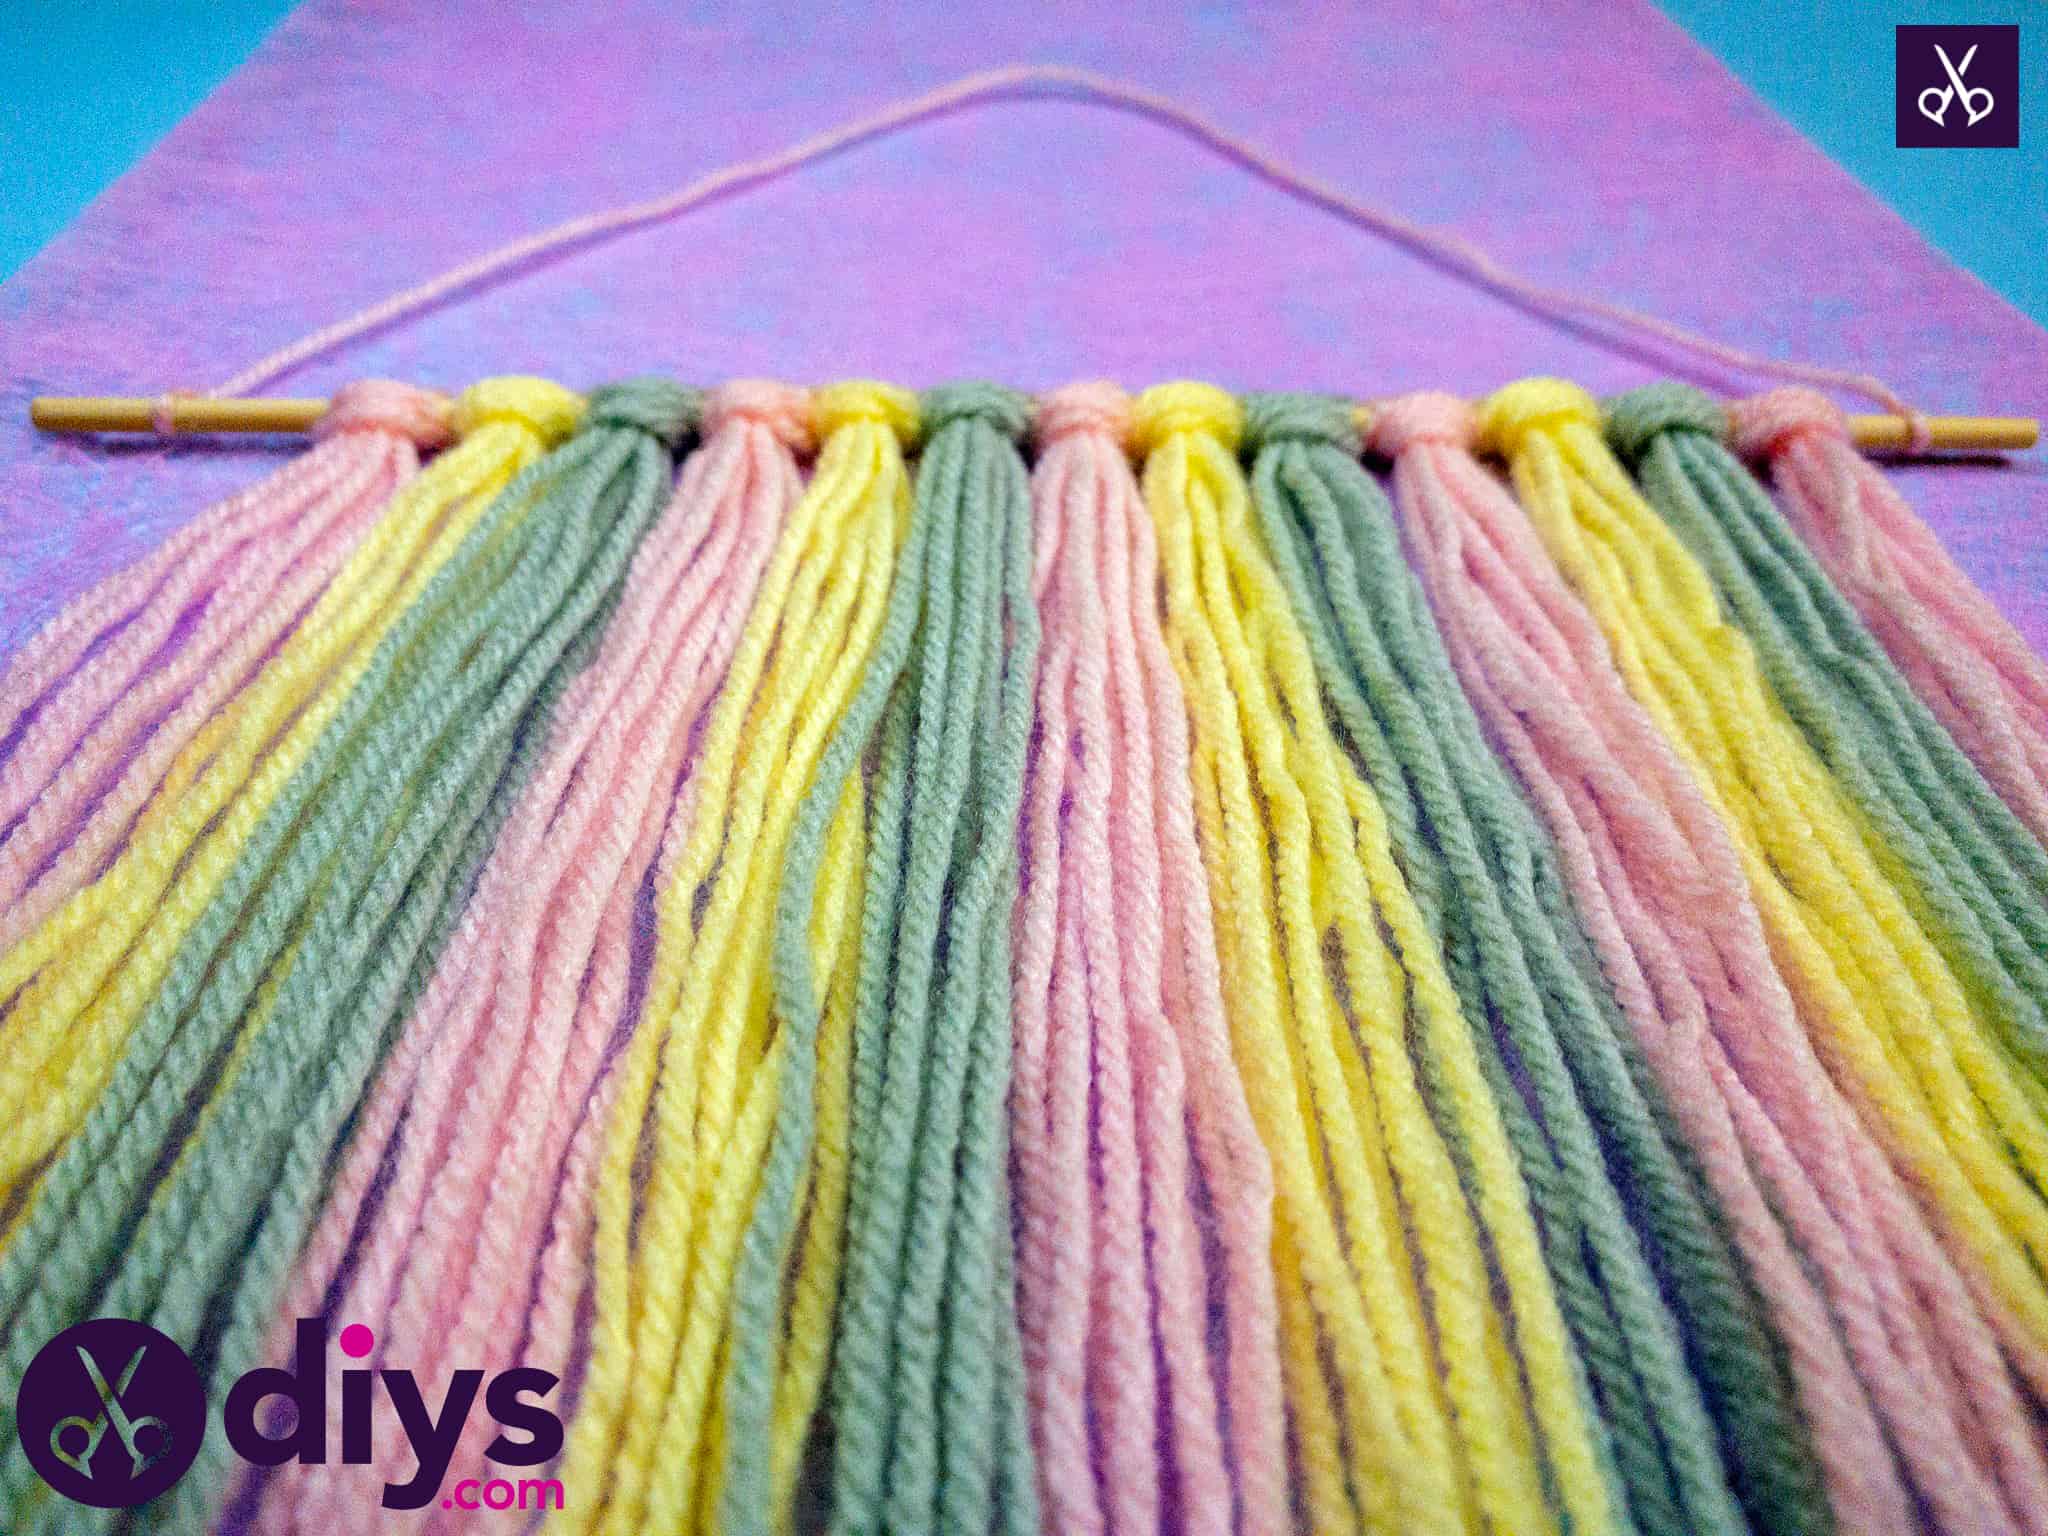 How to make a colorful yarn wall hanging